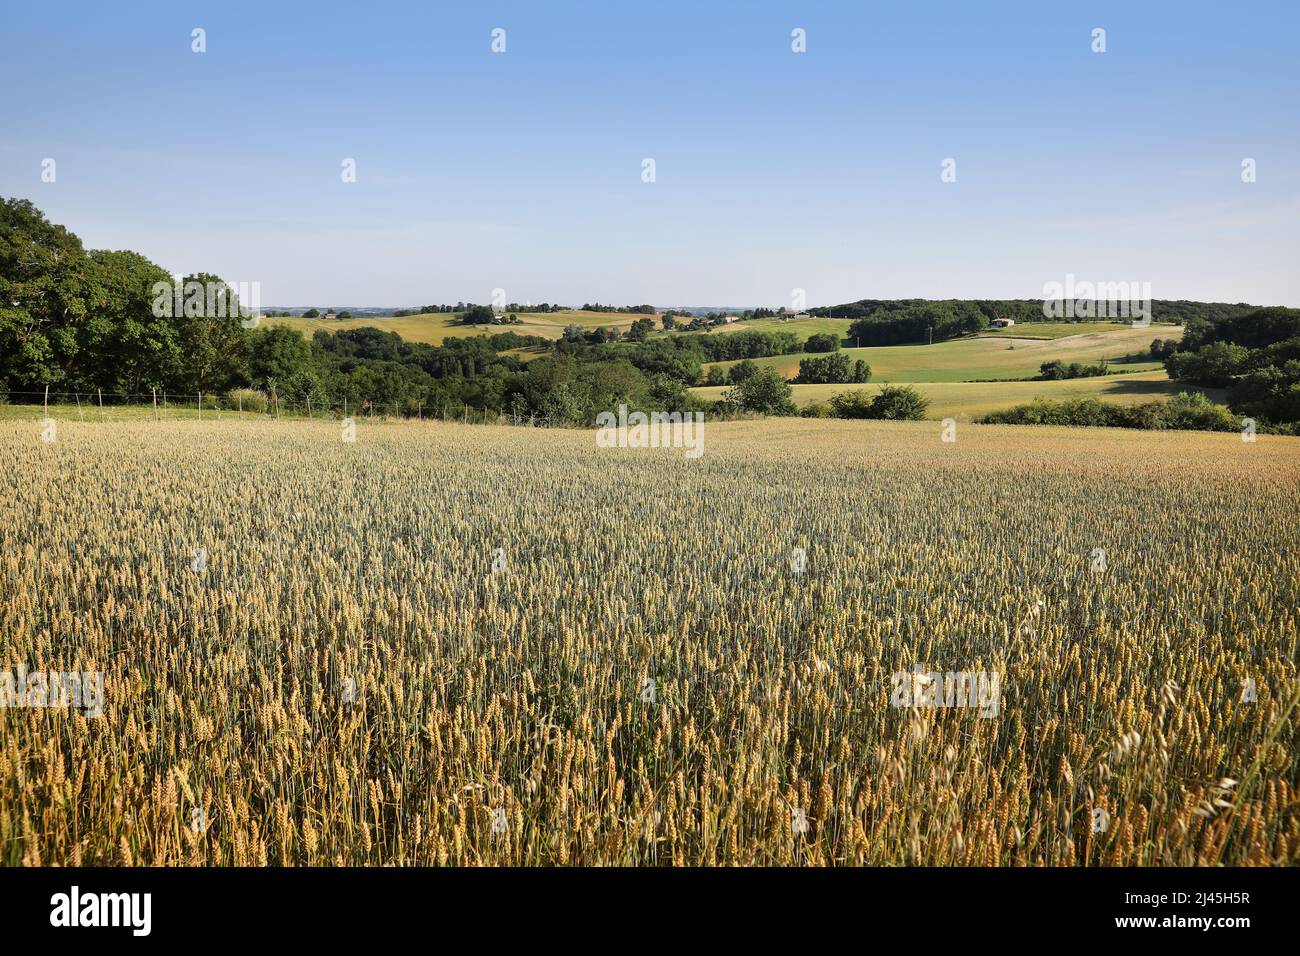 Cereal cultivation in the Pays de Serre area, Quercy blanc (south-western France) Stock Photo